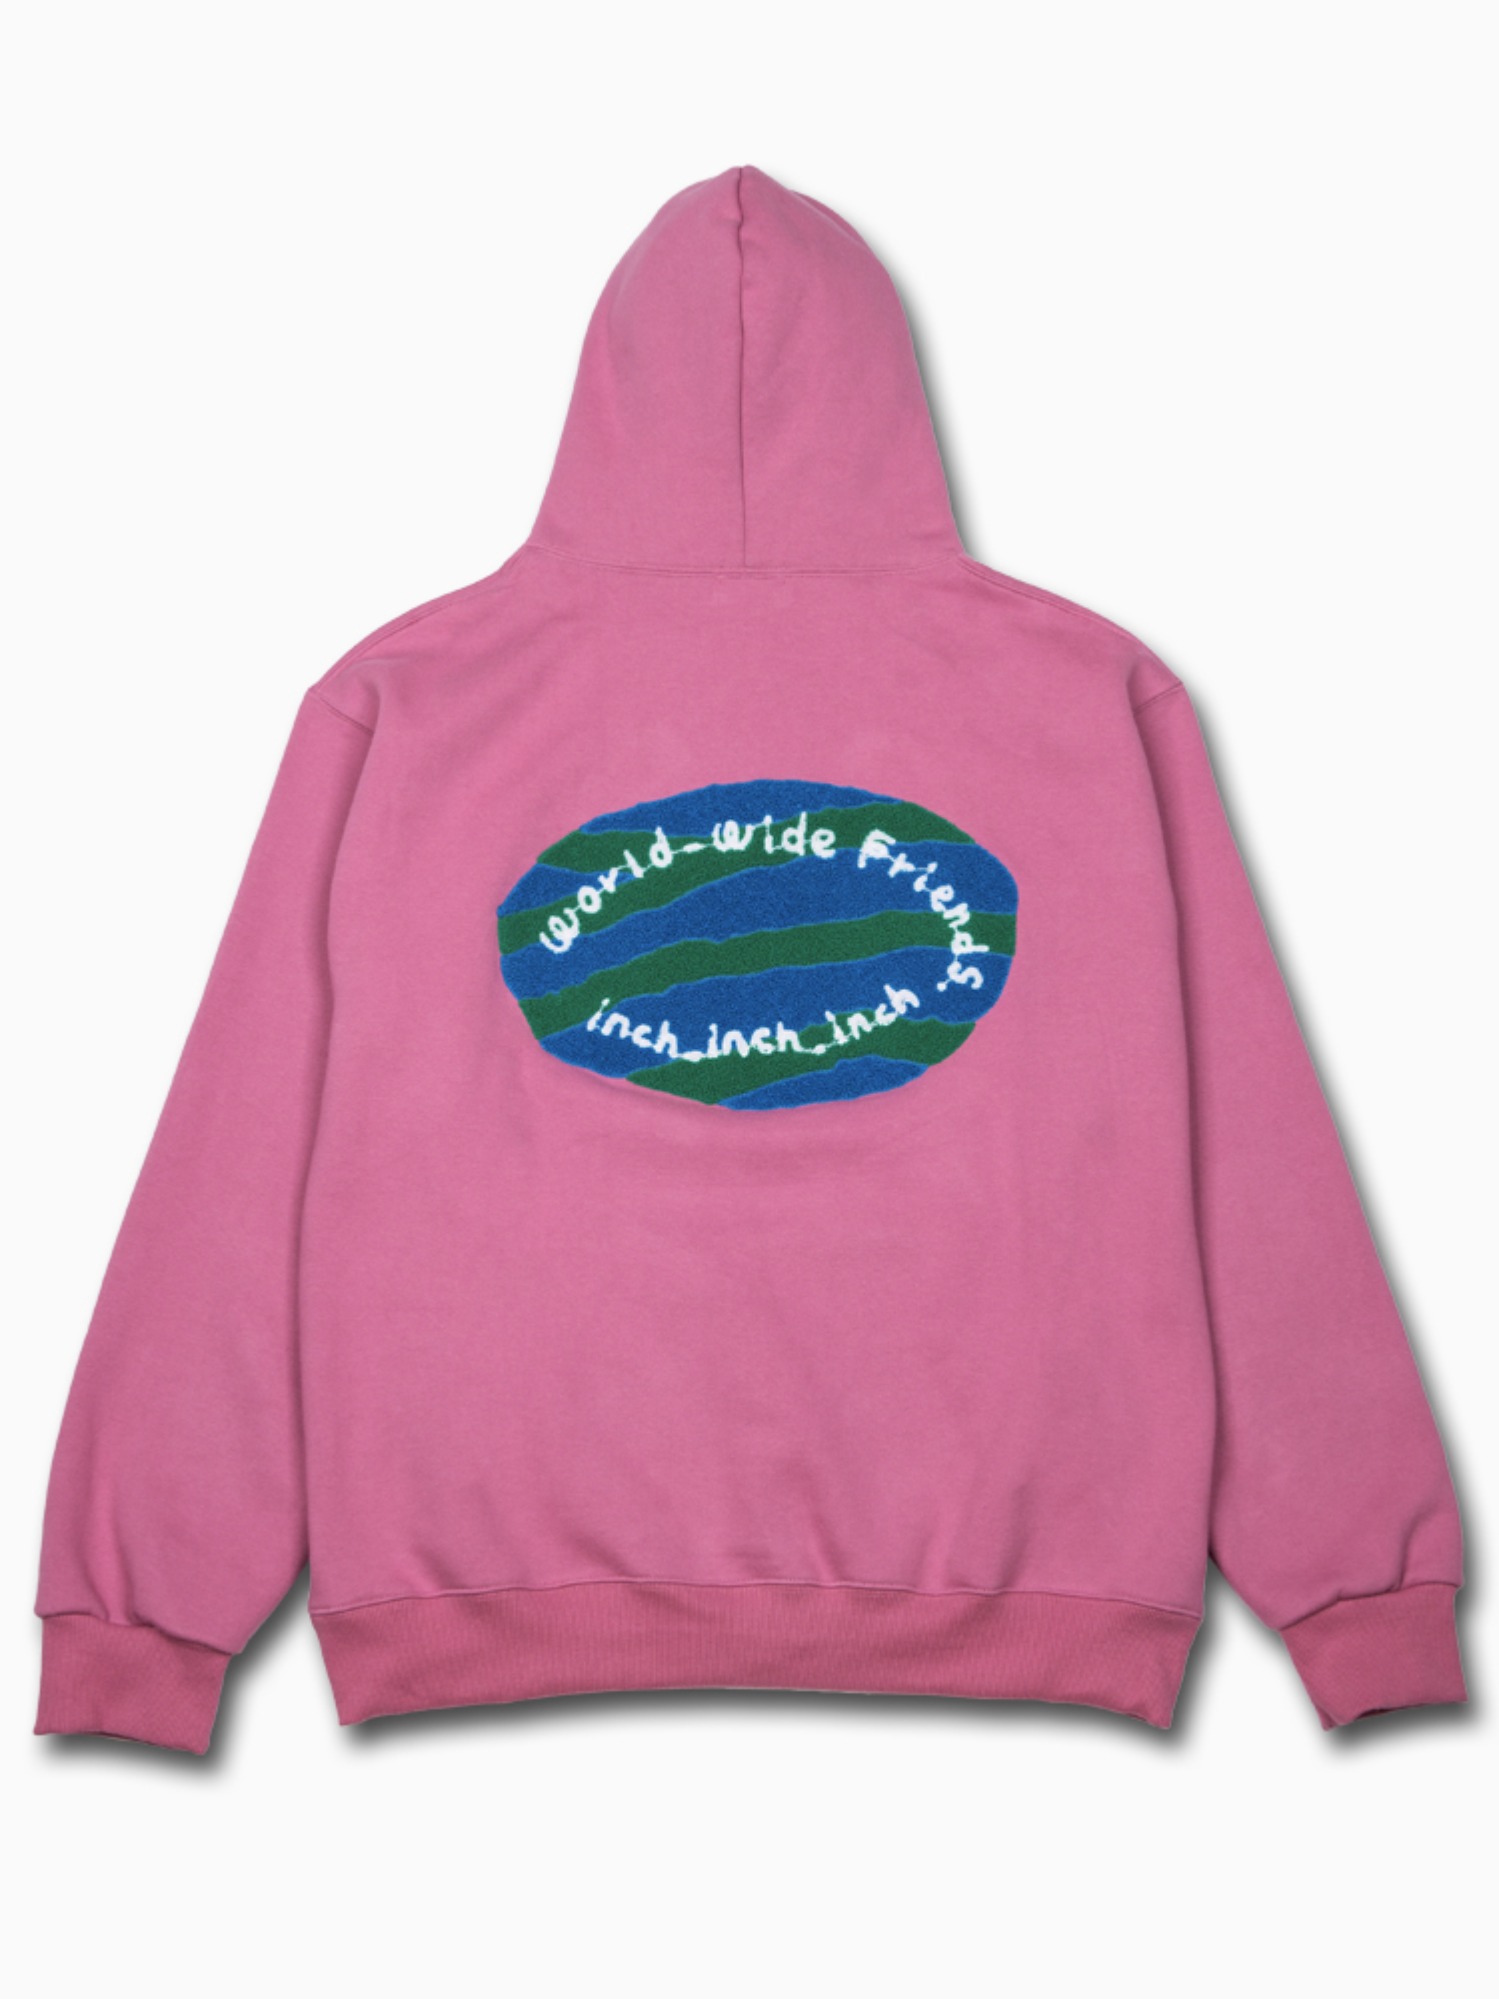 Special Edittion [Tone down Pink] world_wide_friends_hoodie